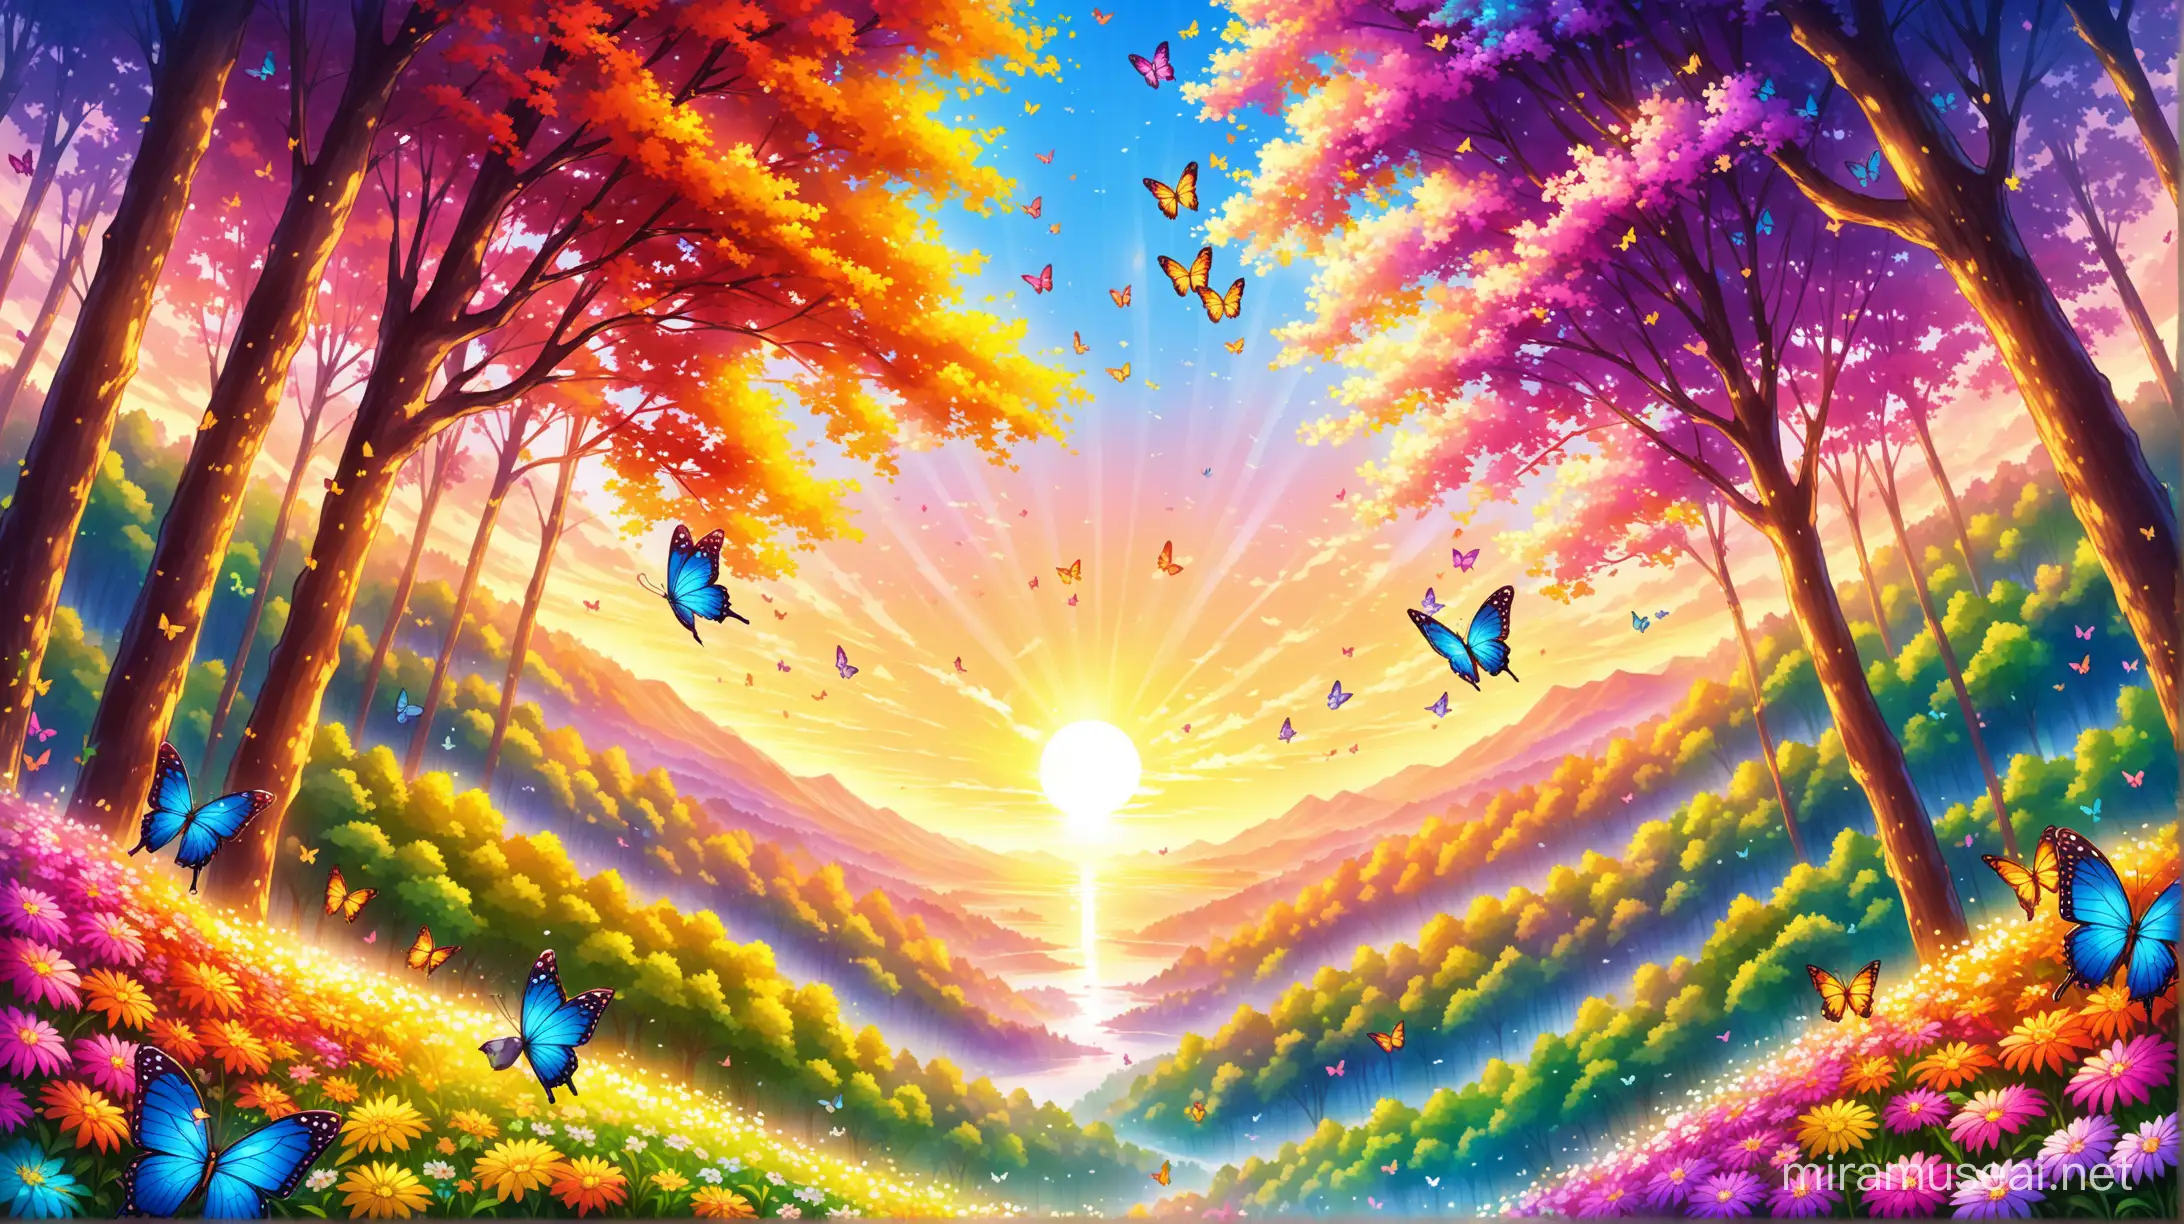 I want you to draw colorful butterflies, colorful flowers, a sunrise view, many types of trees in the forest. Draw something like that so that people will feel peaceful when they look at that picture all the time.